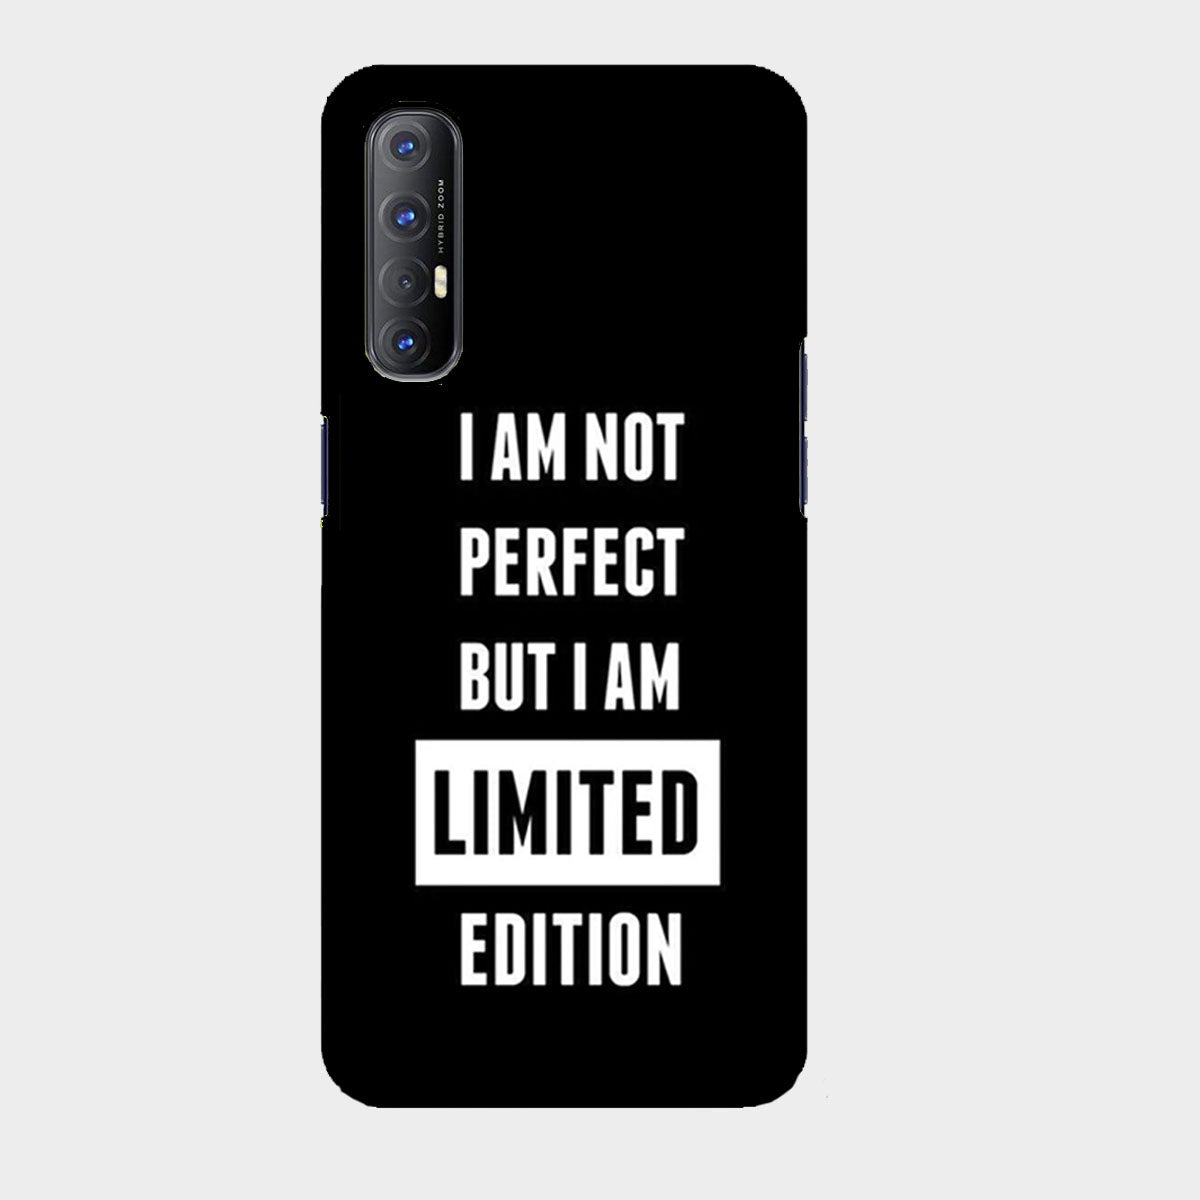 Not Perfect - Mobile Phone Cover - Hard Case